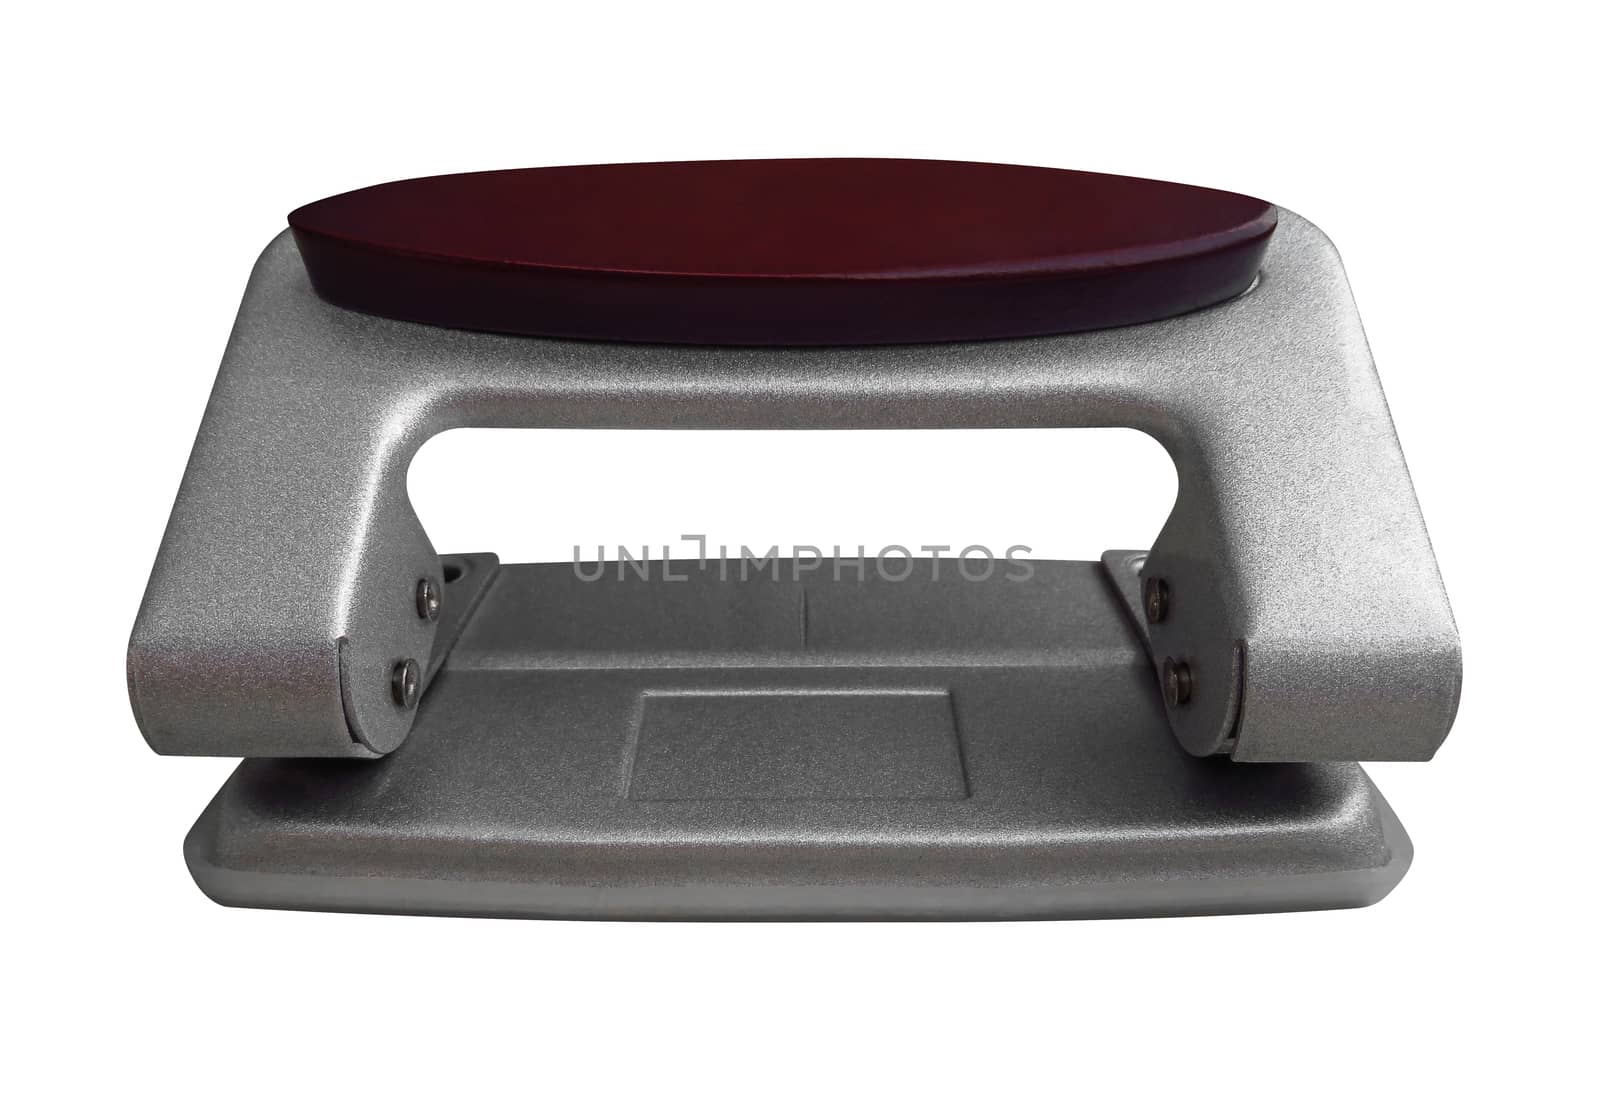 Hole puncher isolated on a white. Clipping path included.